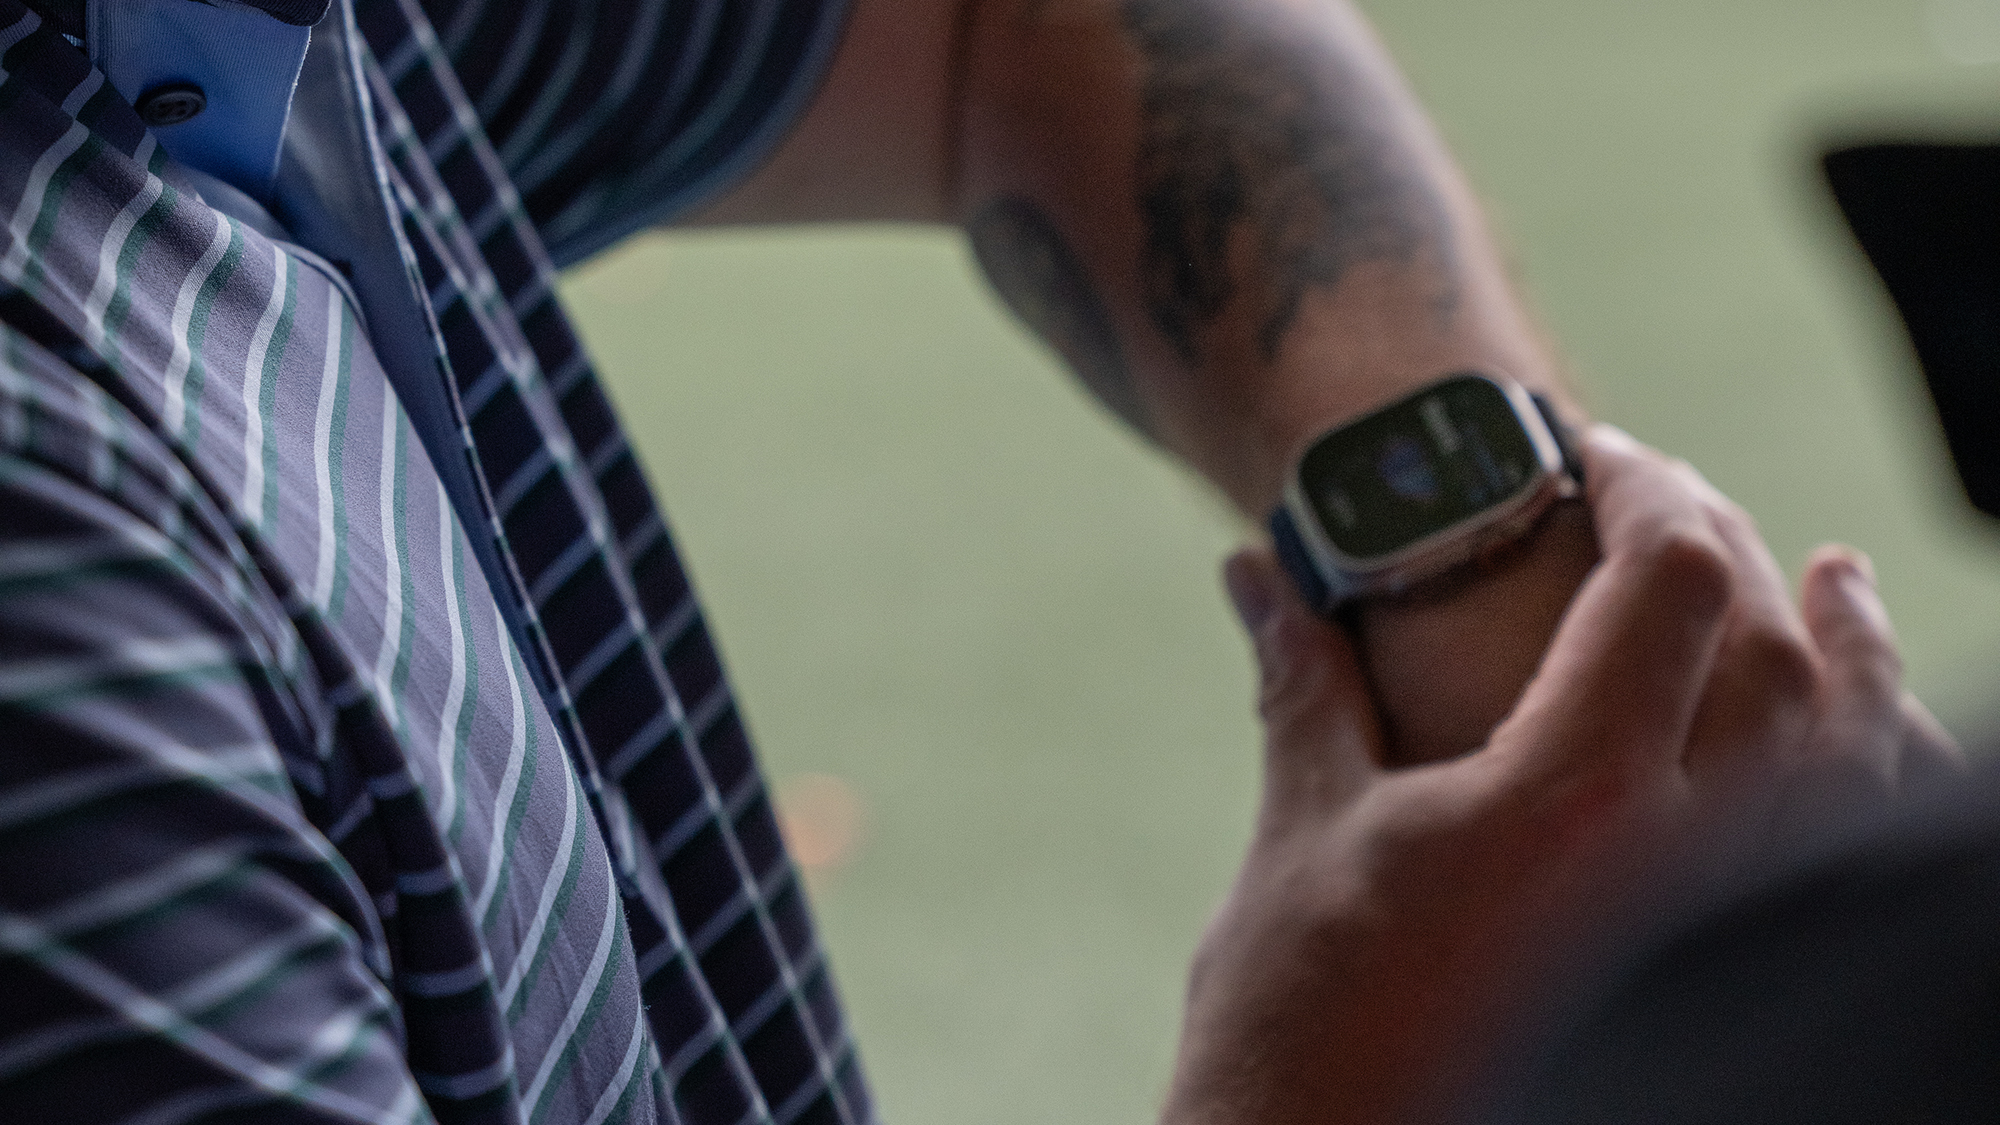 Using the Apple Watch to analyze the golf swing